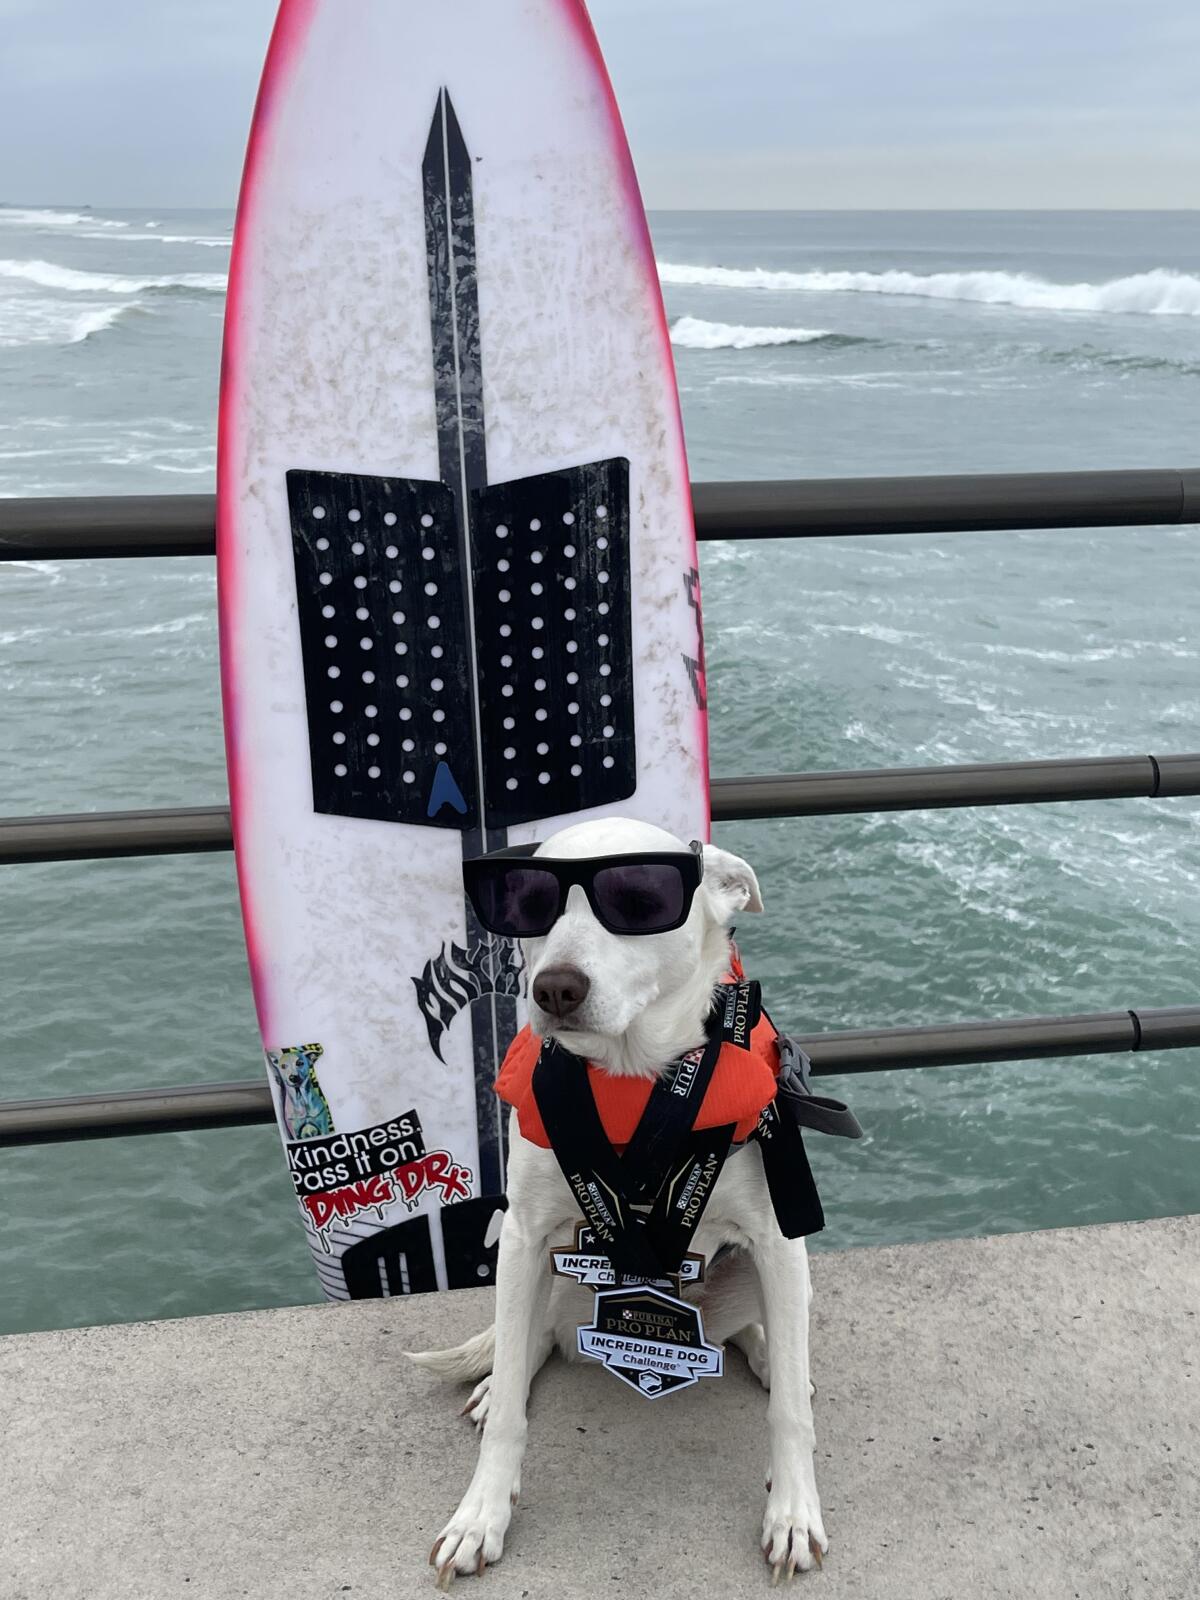 Sugar the Surfing Dog is a 10-year-old that was rescued as a pup.